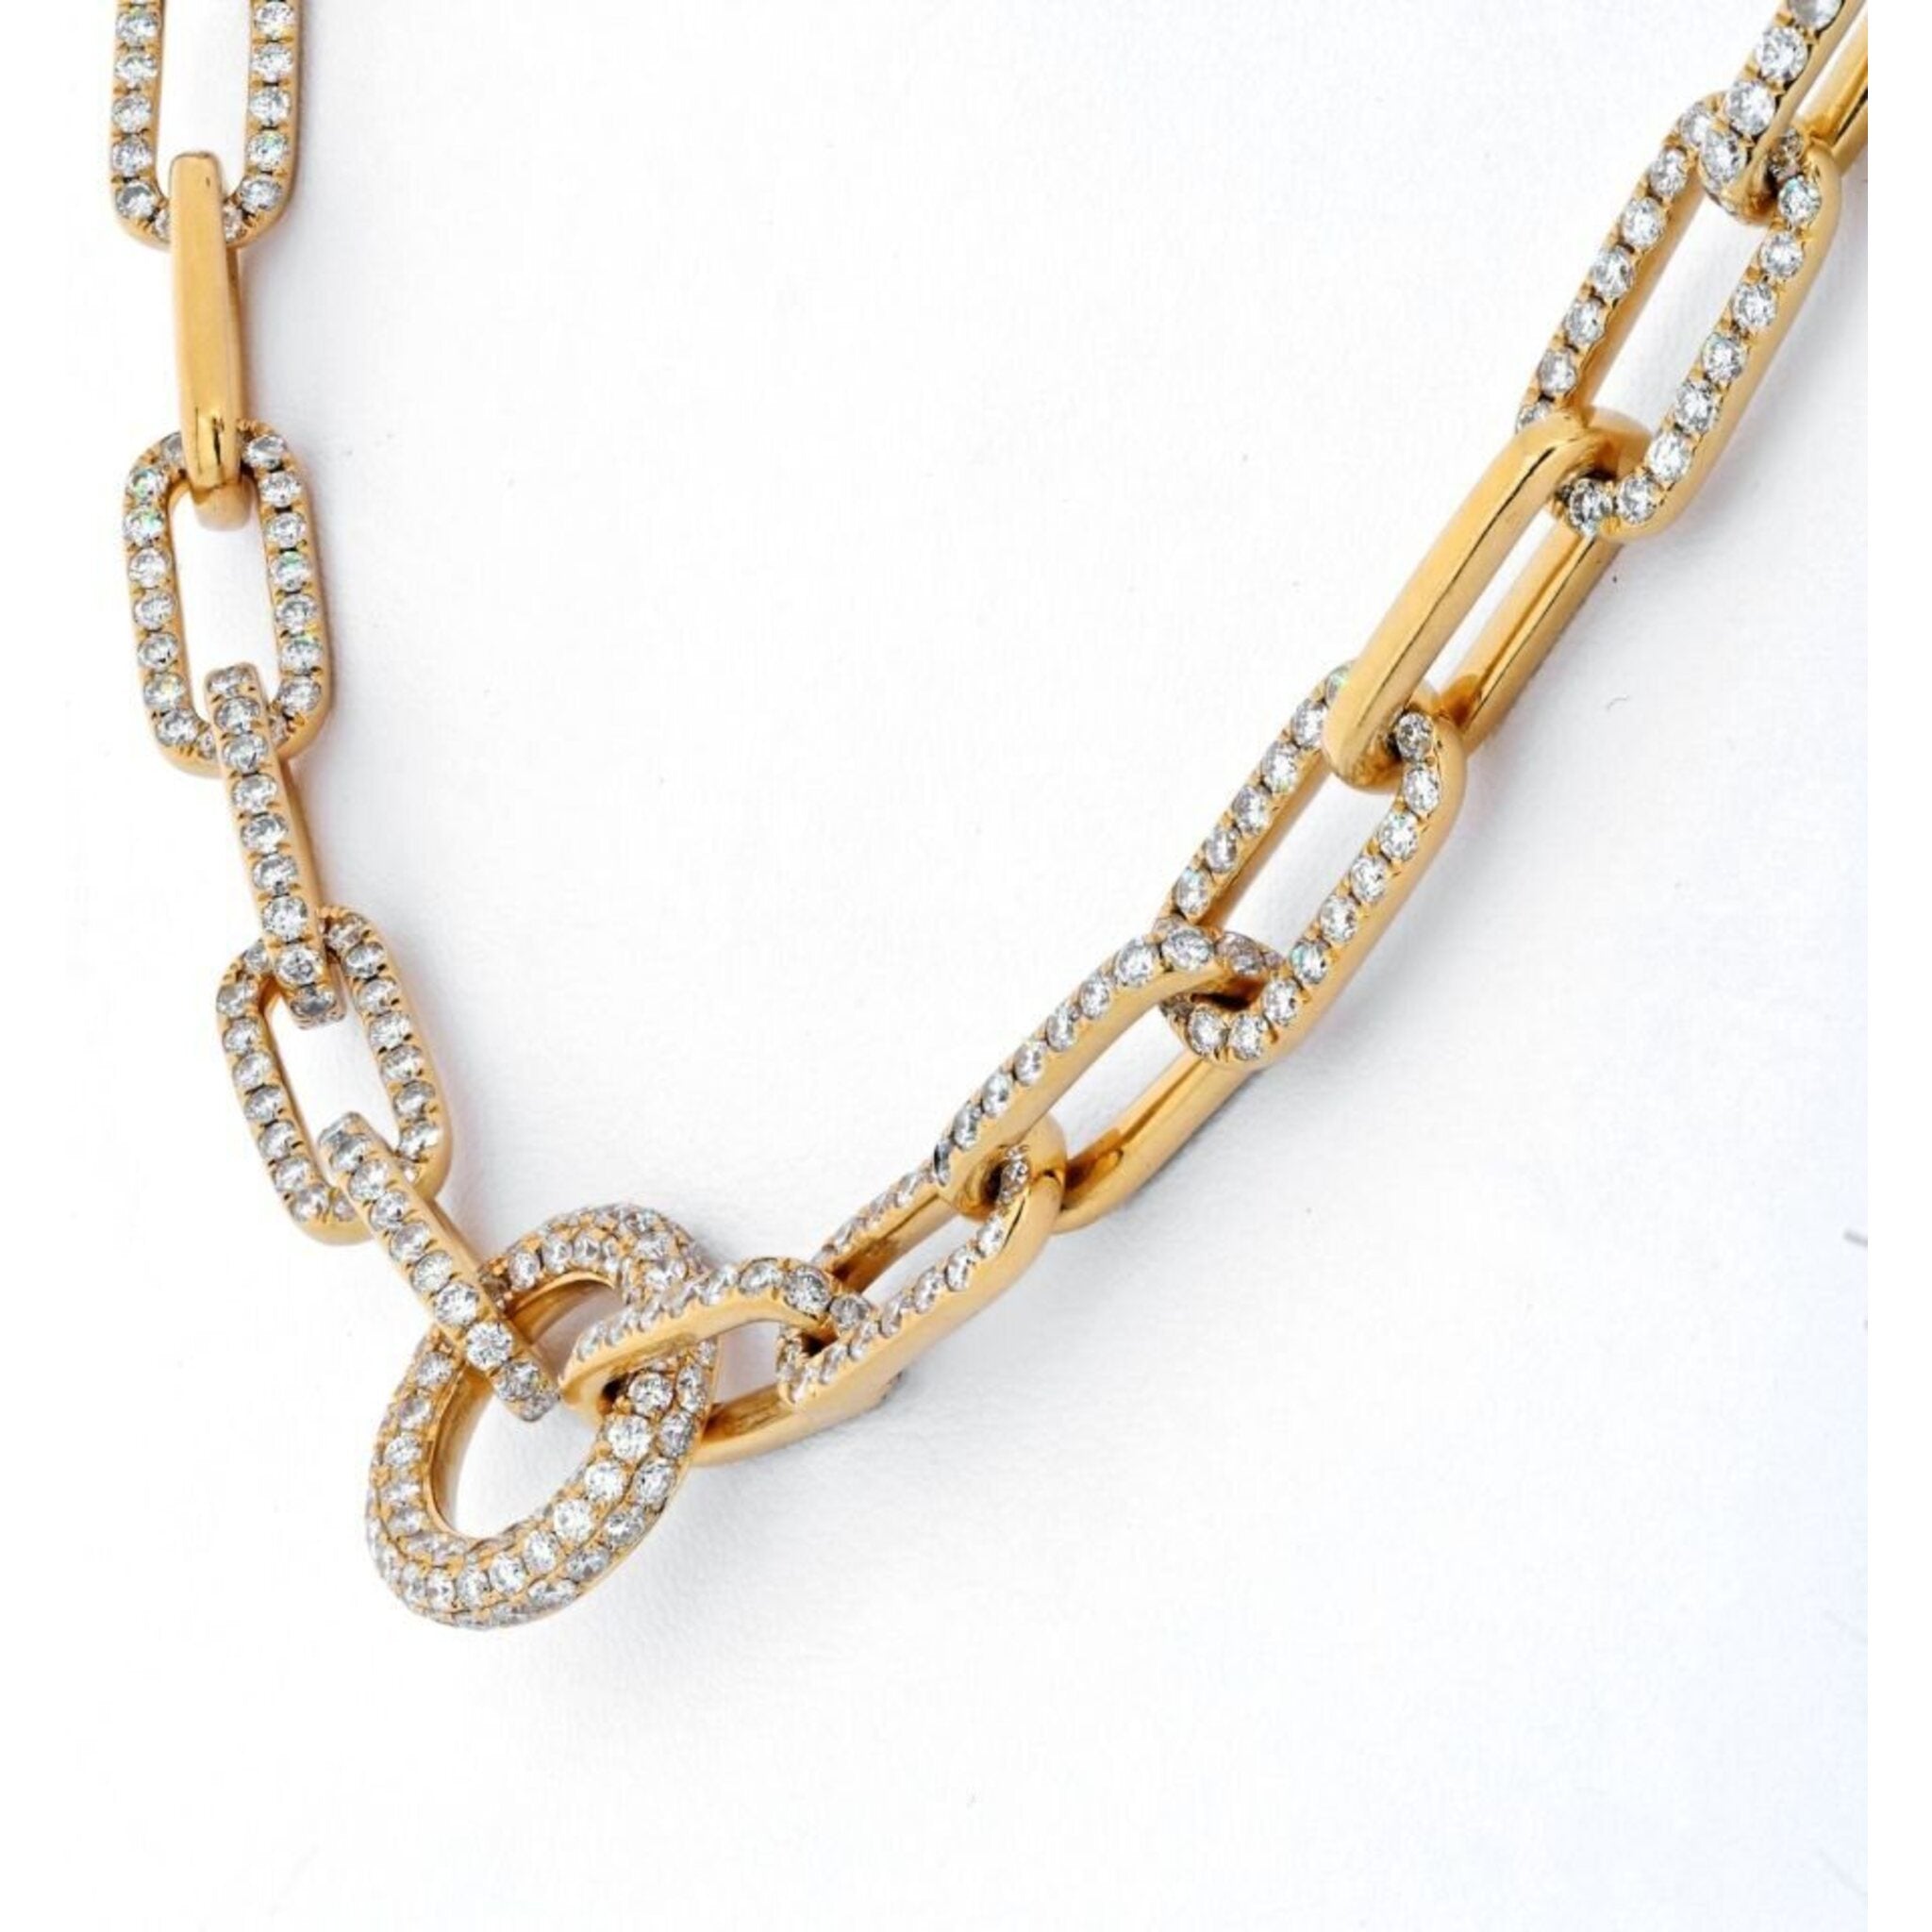 18K Yellow Gold 21 Carats Diamond Link Chain Necklace